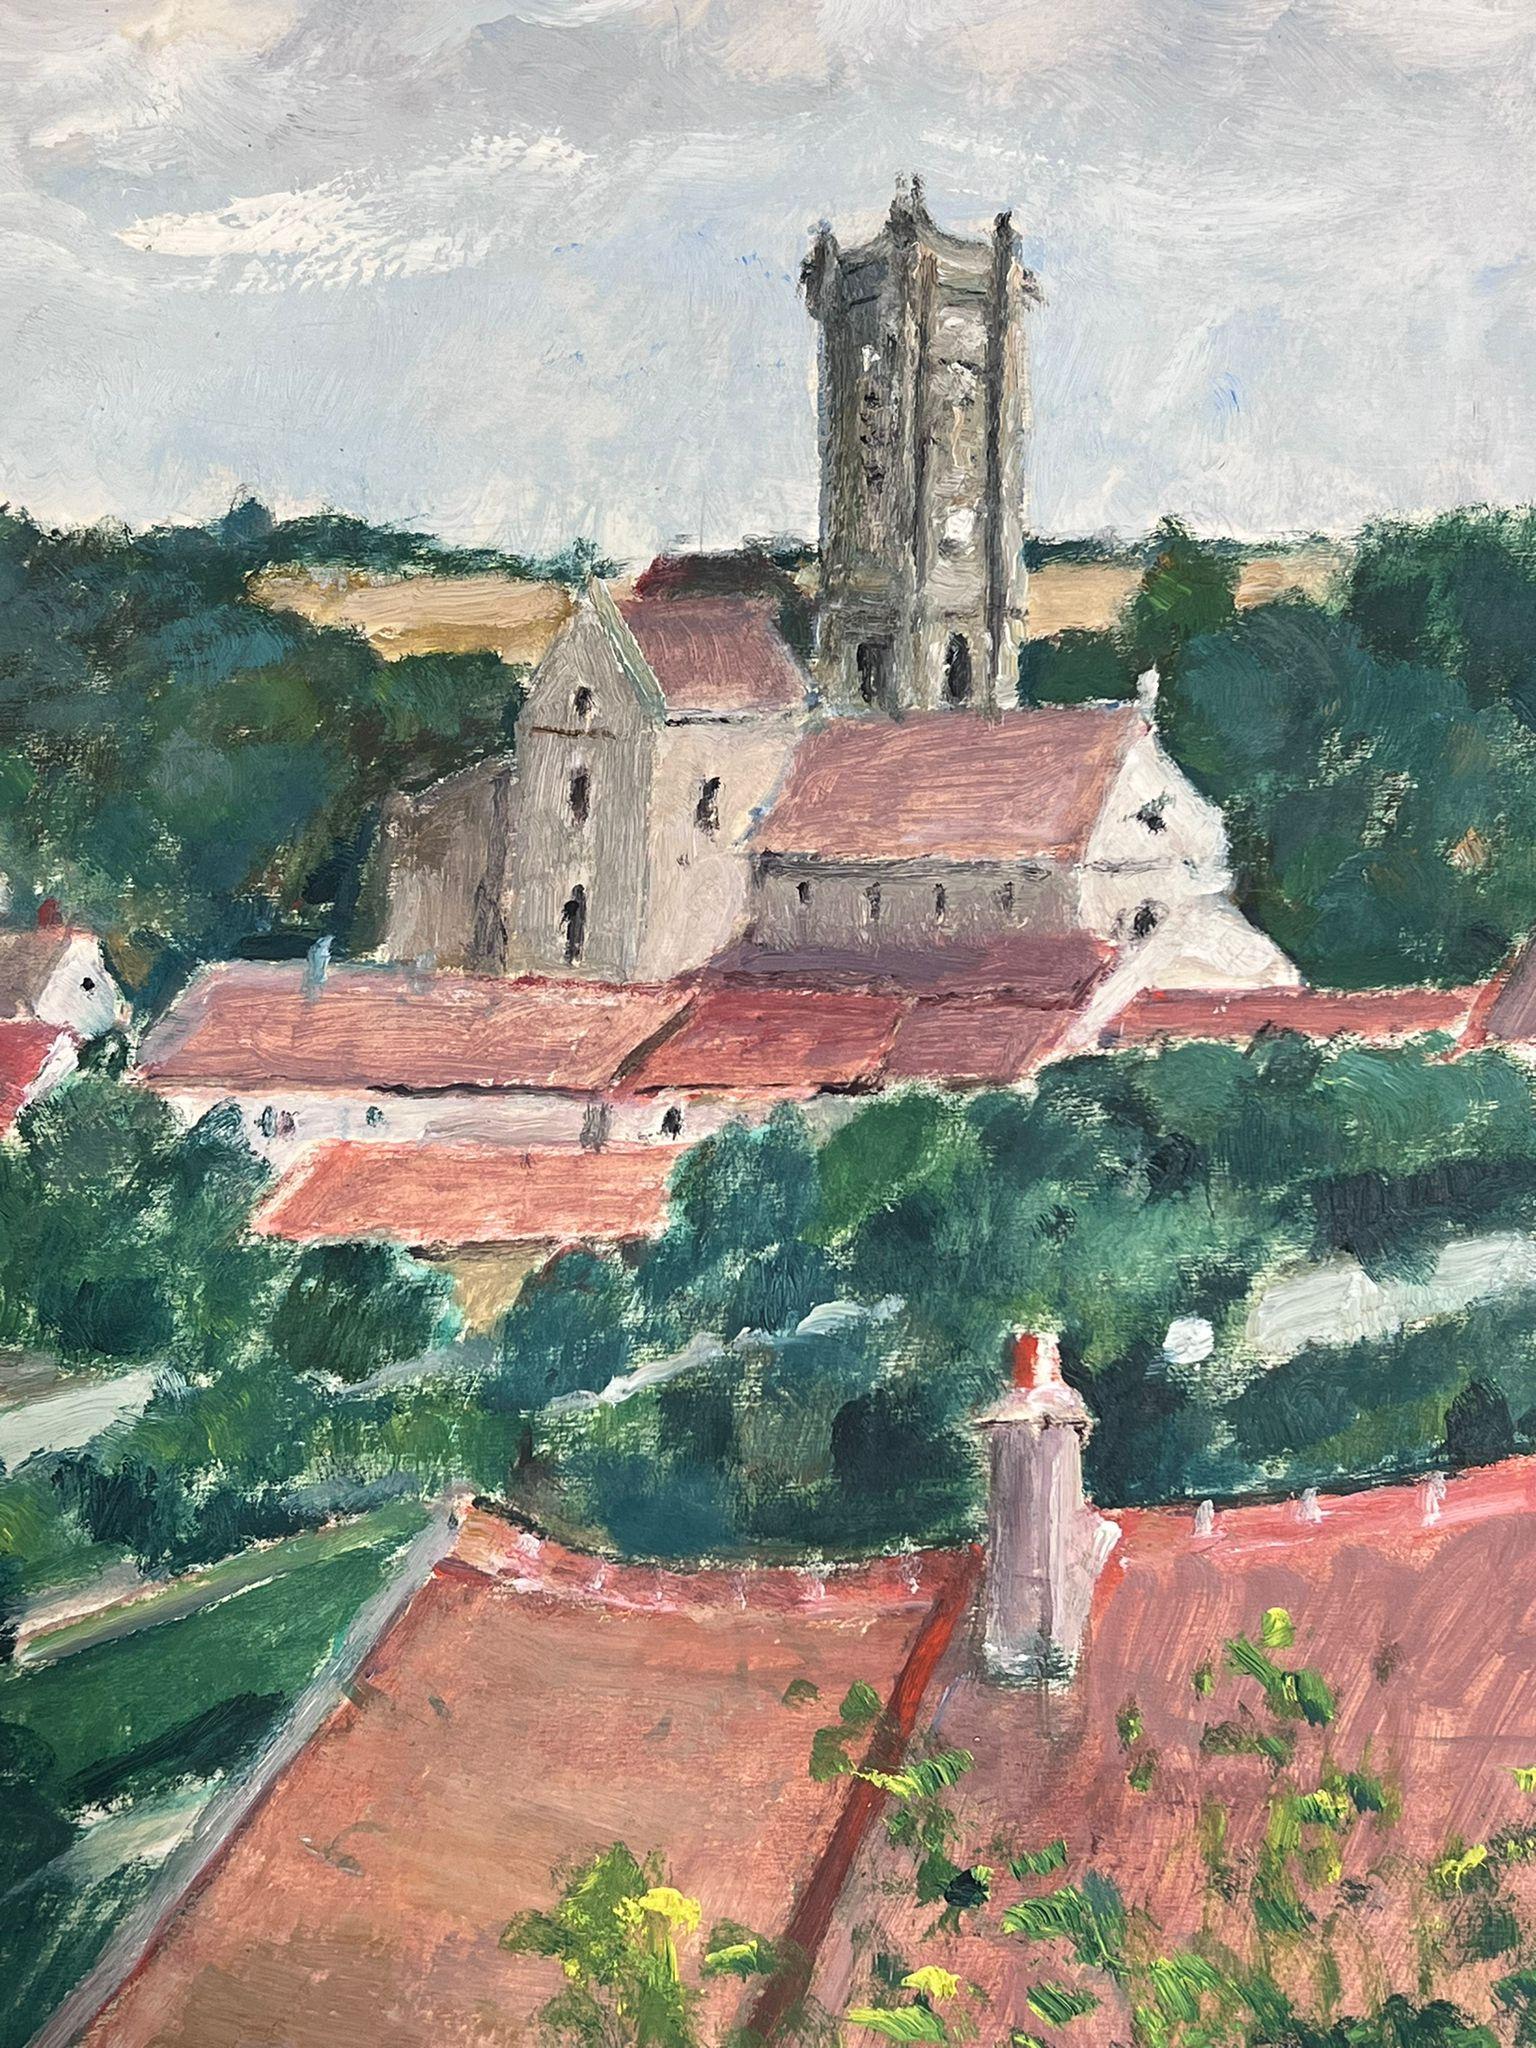 French Landscape
by Louise Alix, French 1950's Impressionist 
oil on artist paper, unframed
painting: 16 x 12.5 inches
provenance: from a large private collection of this artists work in Northern France
condition: original, good and sound condition